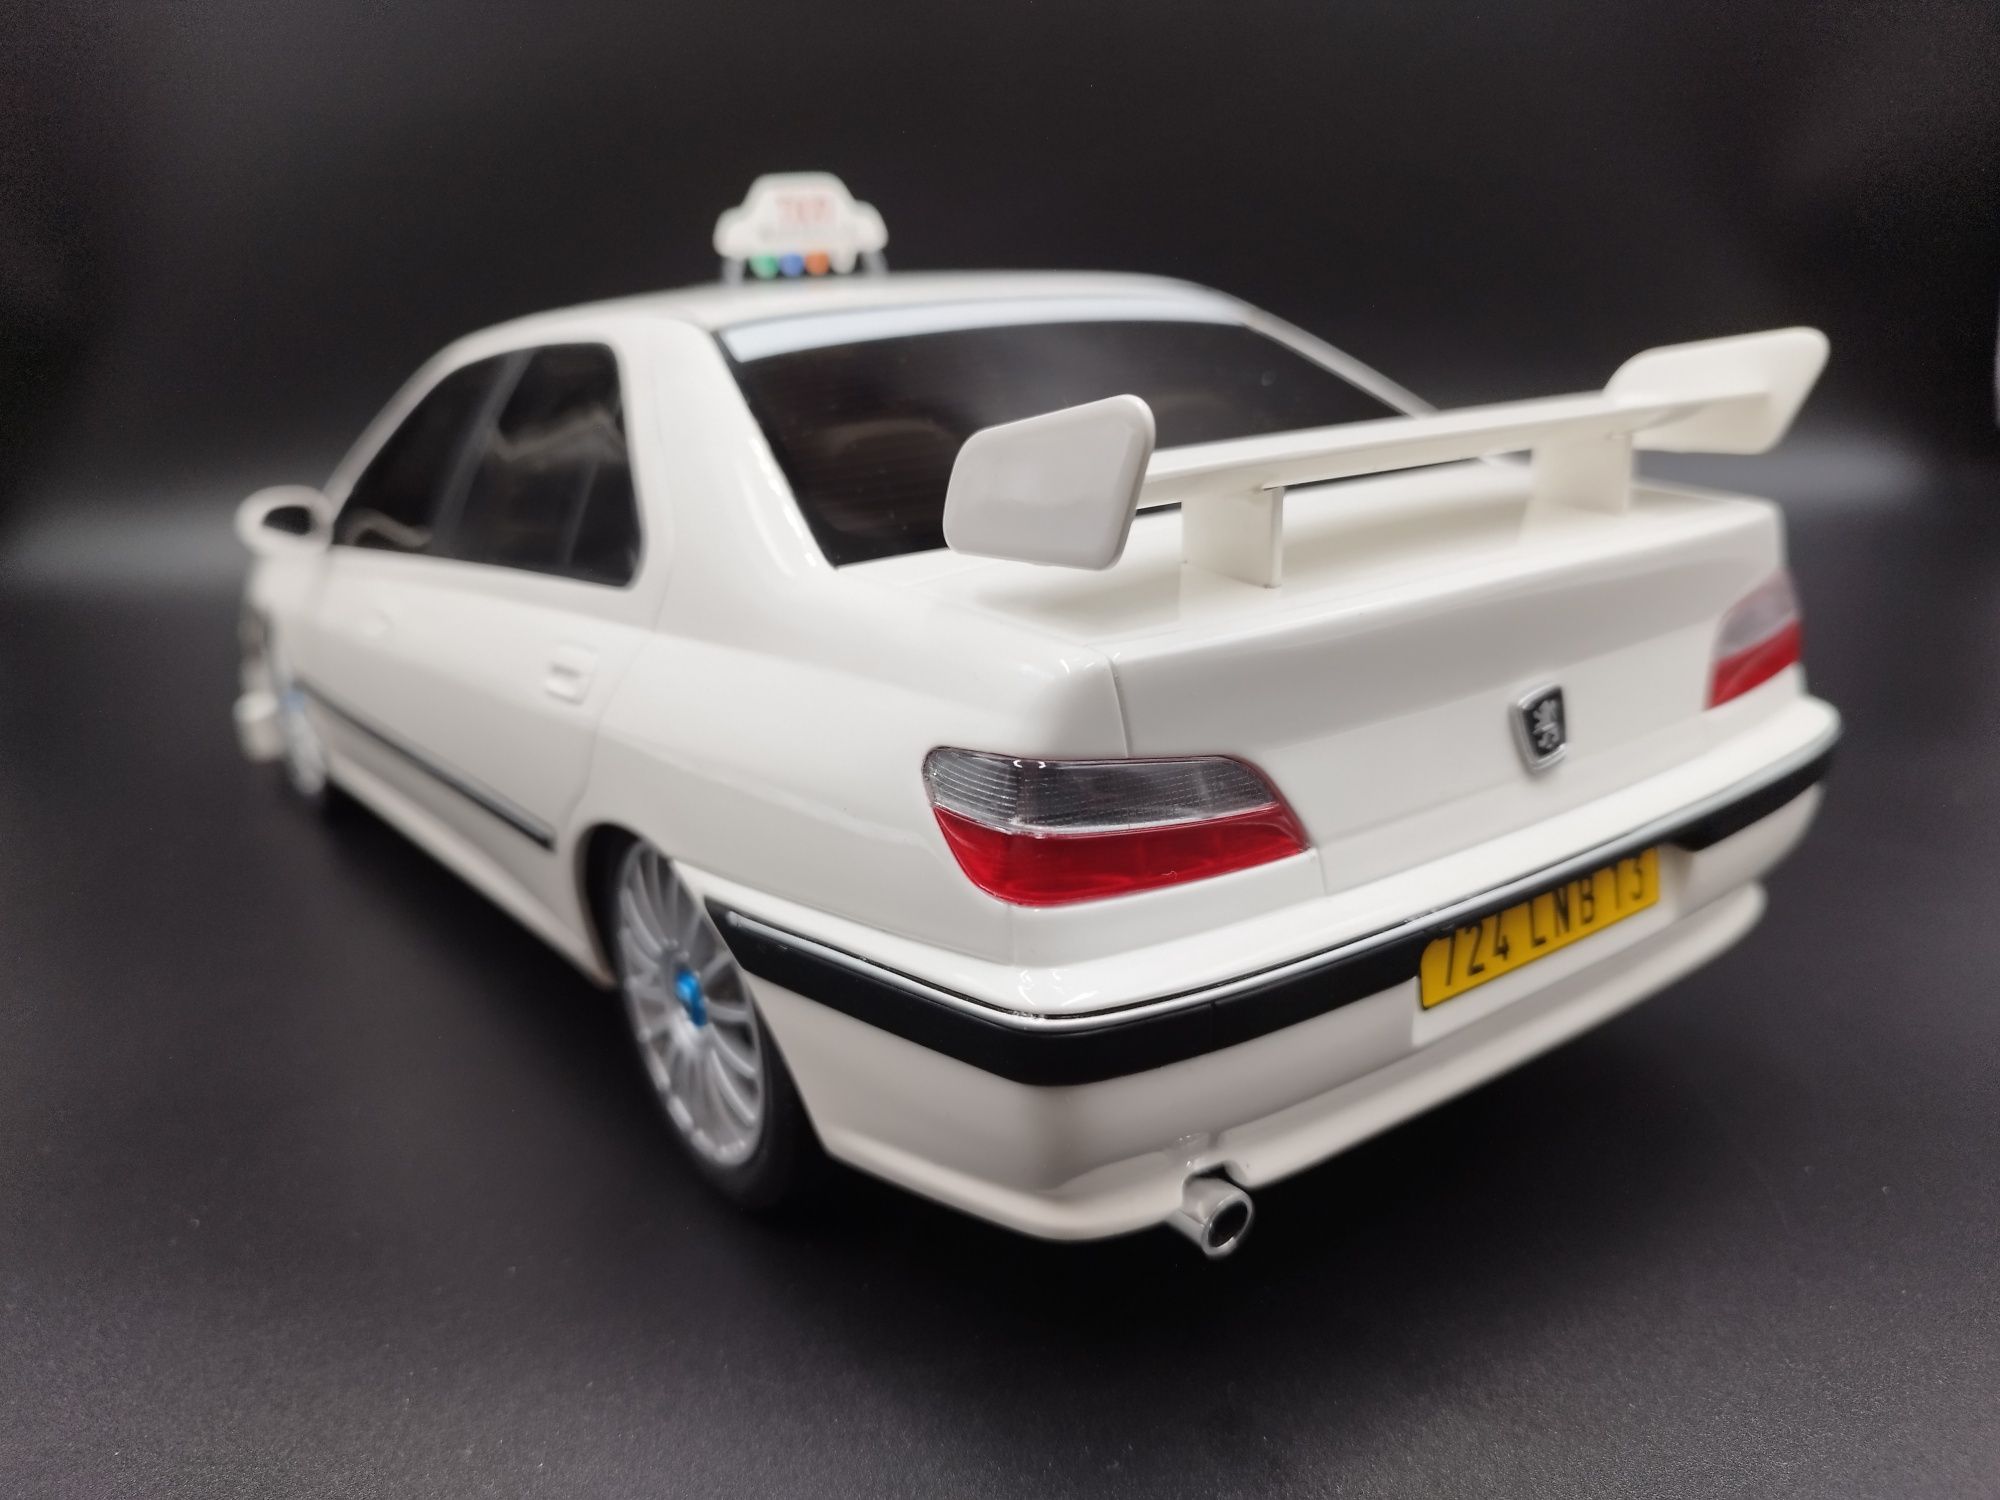 1:12 Otto G068 UVI Peugeot 406 TAXI model 1:12 nie 1:18 model nowy